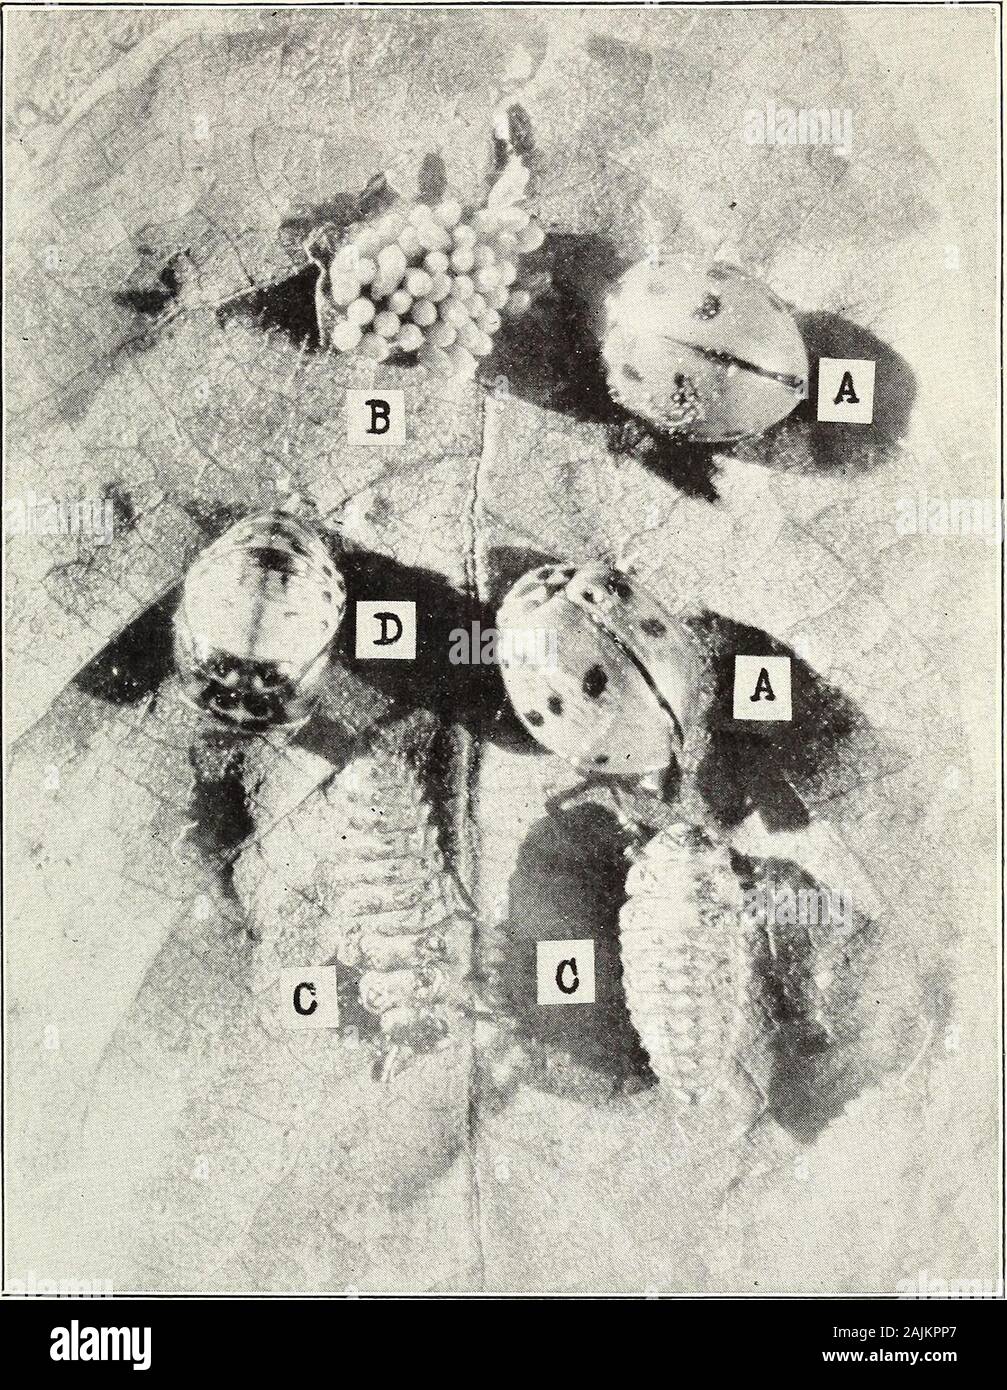 Walnut aphids in California . 2, 3, and 4 per cent strengths, effective. Commercial lime-sulphur, 1-50, combined with commercial tobacco extract Xo. 1,1-100, effective. 1 Sept., 1912. Carnes, E. K. Insectary Division Reports for the months of June and July, 1912. Mo.Bui. Cal. State Hort. Com., v. 1, no. 10, p. 820-S2S-. Some experiments -with the common ladybird (Hippodamia convergens), p. 821-826. 2 Apr., 1912. Essig, E. O. The walnut plant louse ( Chromaphis juglandicola [Kalt] Walker). Mo. Bui.Cal. State Com. Hort., v. 1, no. 5, p. 190-194, figs. 72-73. Control, p. 192. s Cf. Biennial Crop Stock Photo